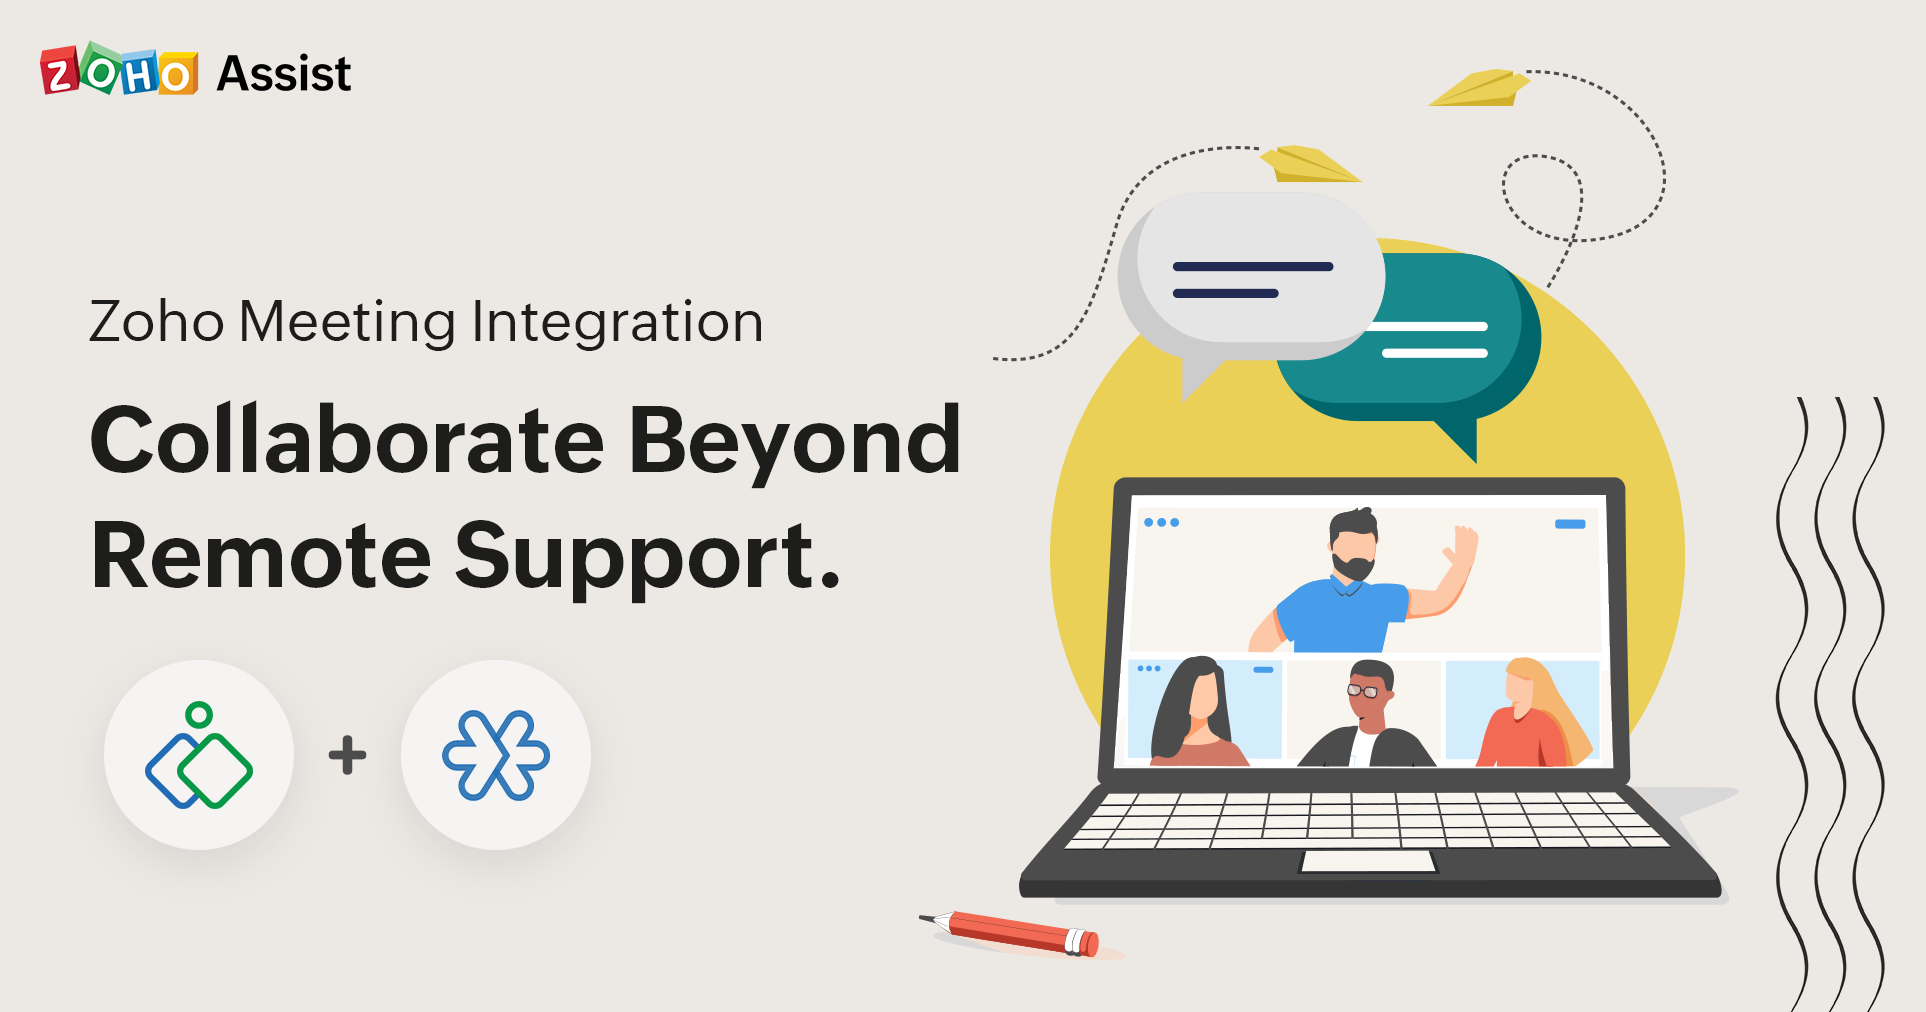 Collaborate beyond remote support with our Zoho Meeting integration